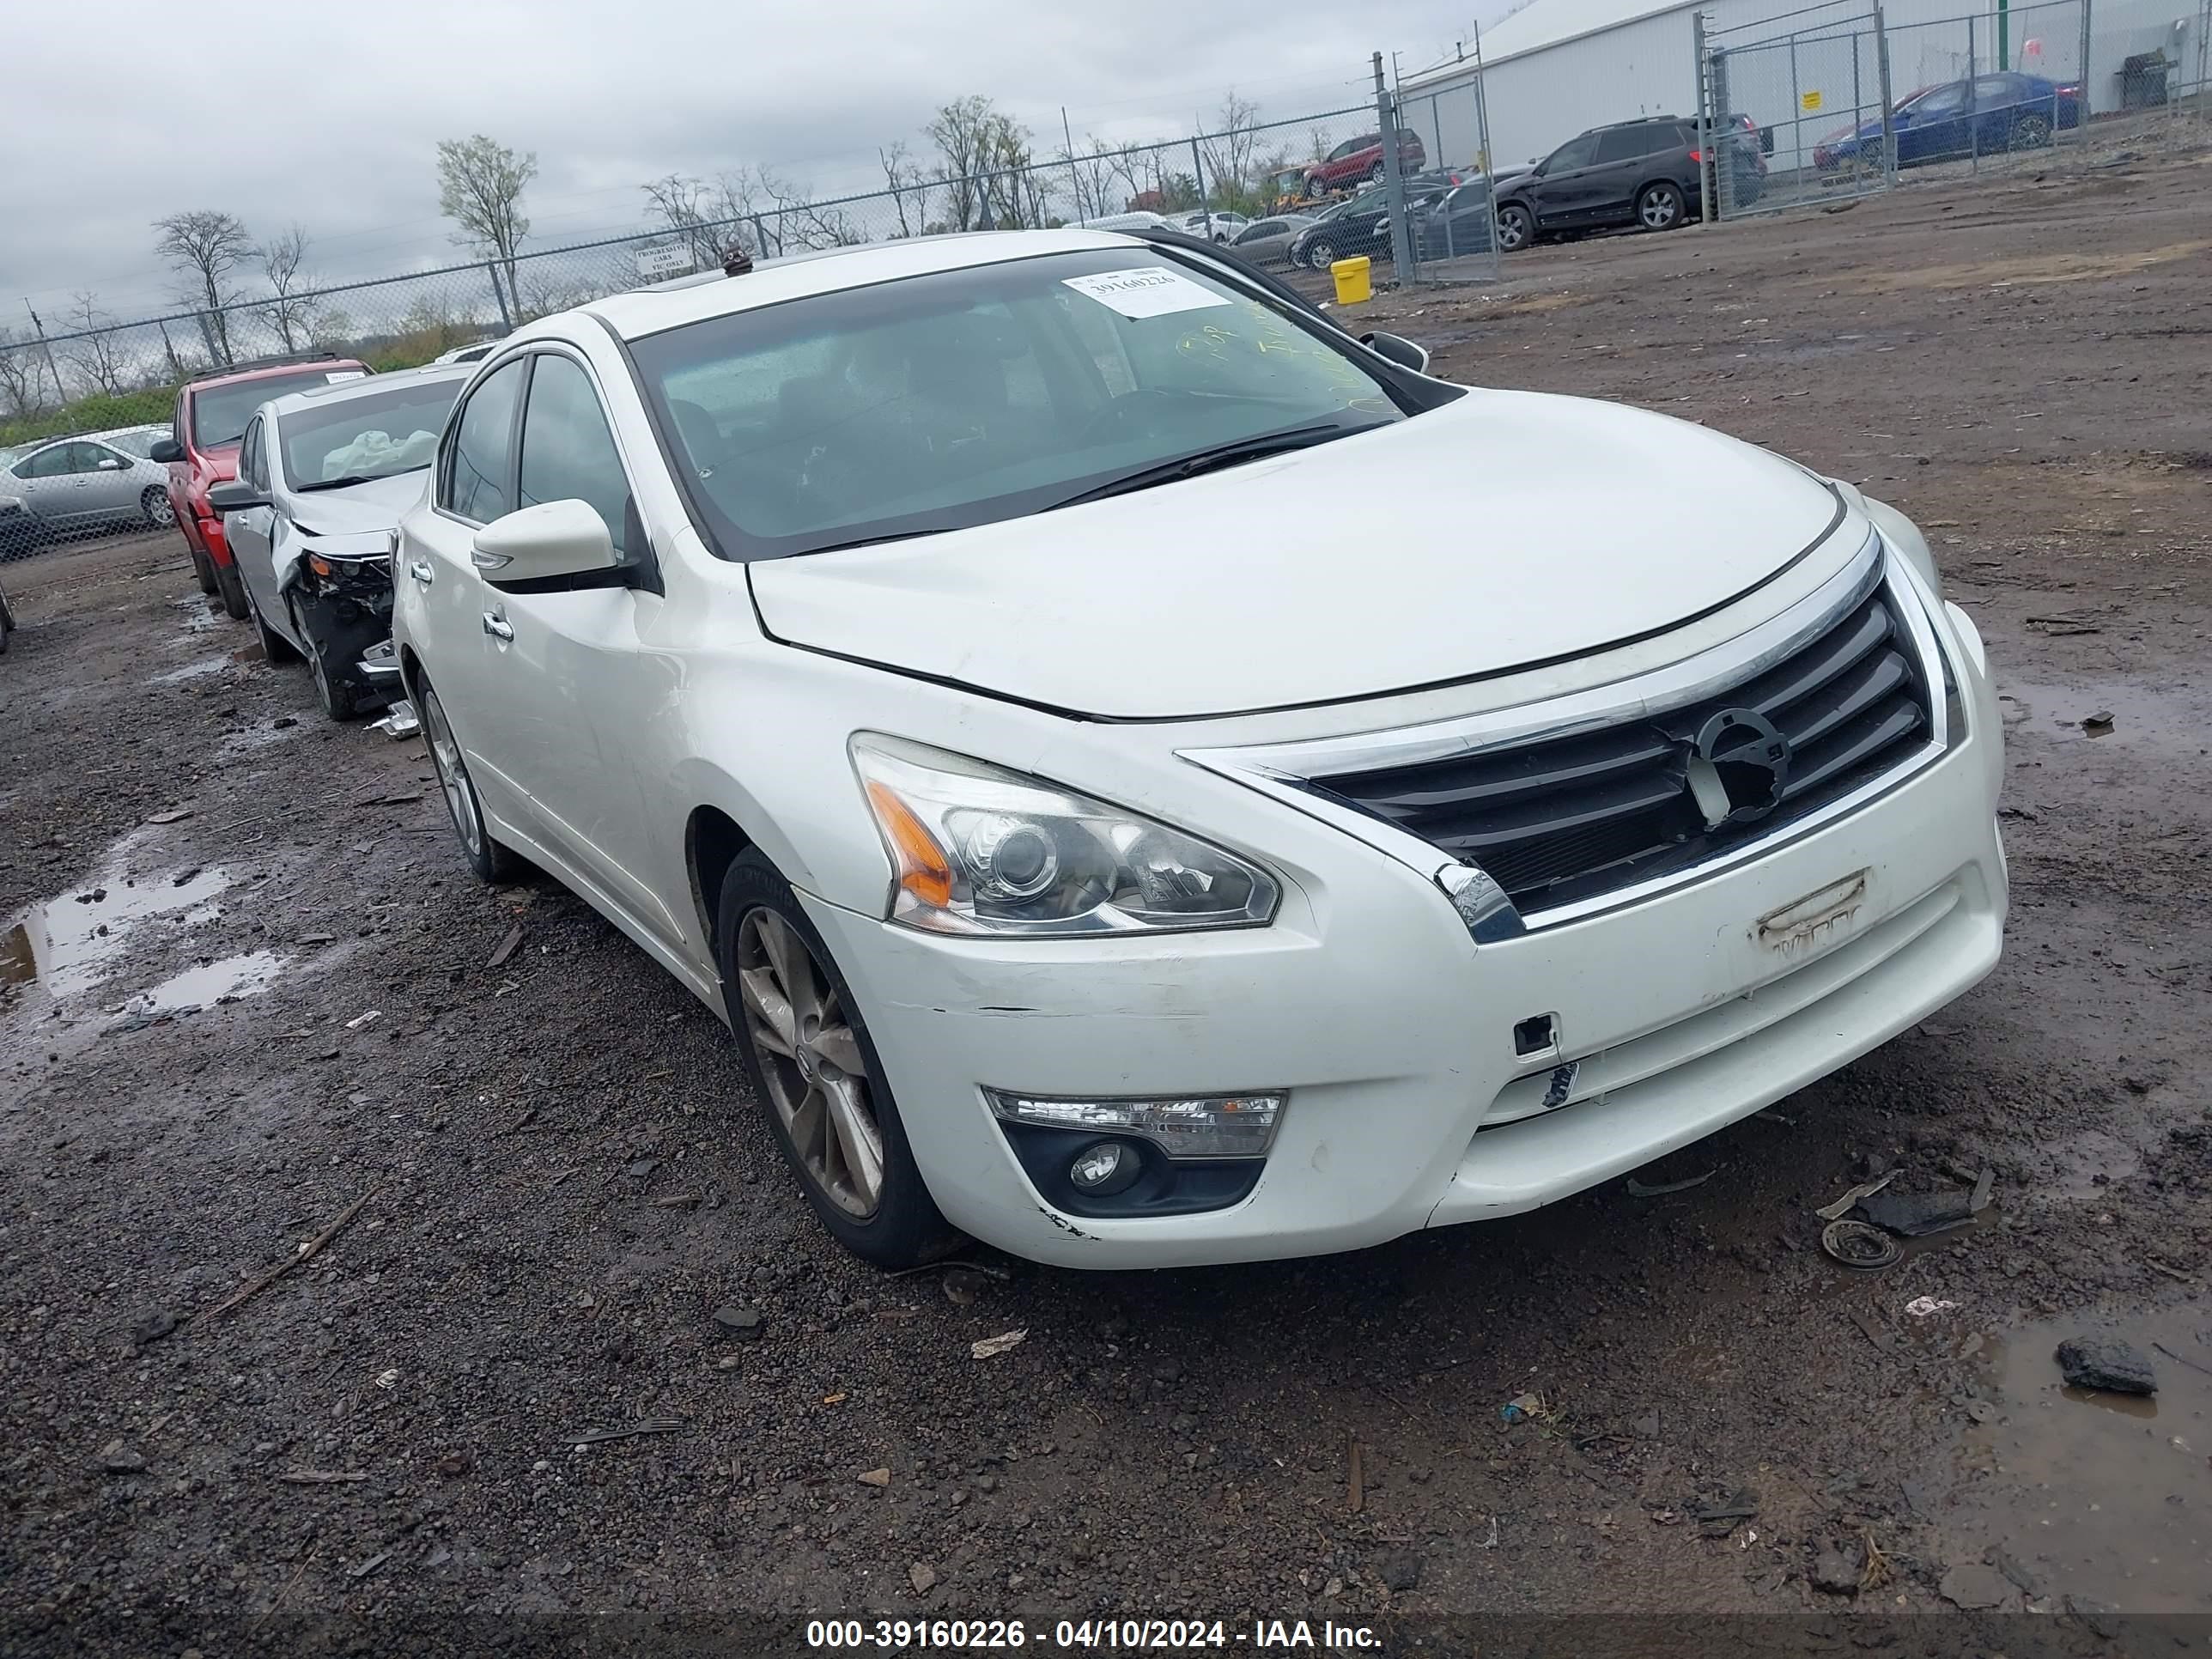 vin: 1N4AL3APXFC592156 1N4AL3APXFC592156 2015 nissan altima 2500 for Sale in 45069, 10100 Windisch Rd, West Chester, Ohio, USA